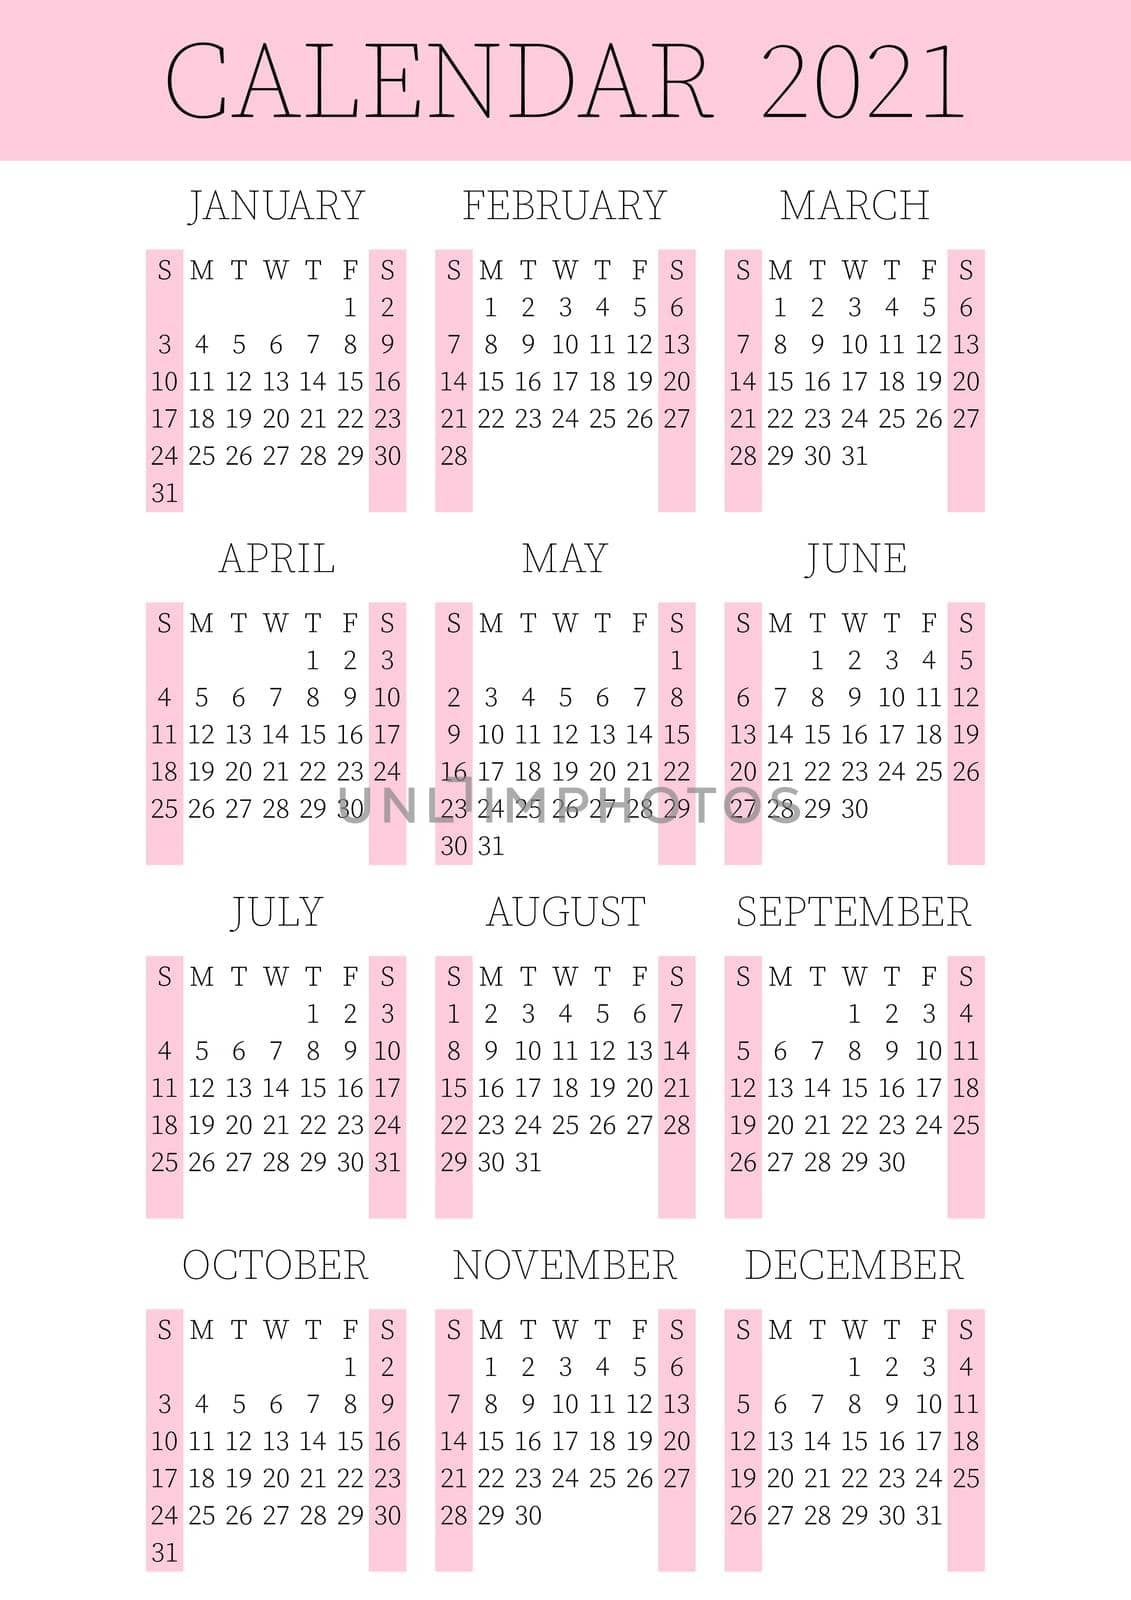 2021 calendar planner. Сorporate week. Template layout, 12 months yearly, white and pink background. Simple design for business brochure, flyer, print media, advertisement. Week starts from Sunday.